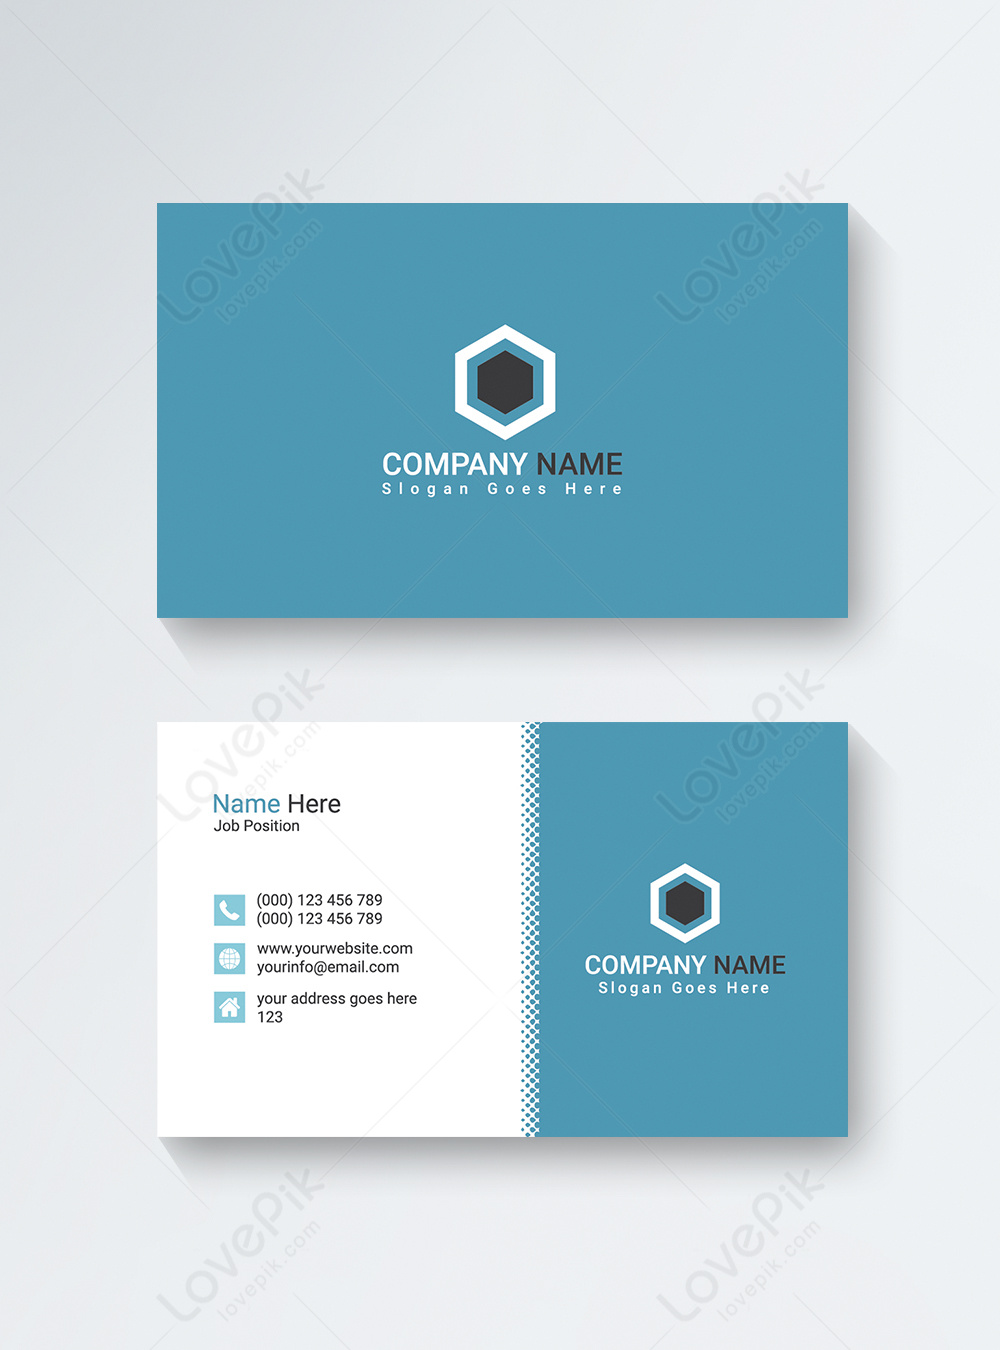 Professional And Creative Business Card Template Image Picture Free Download 450005344 Lovepik Com